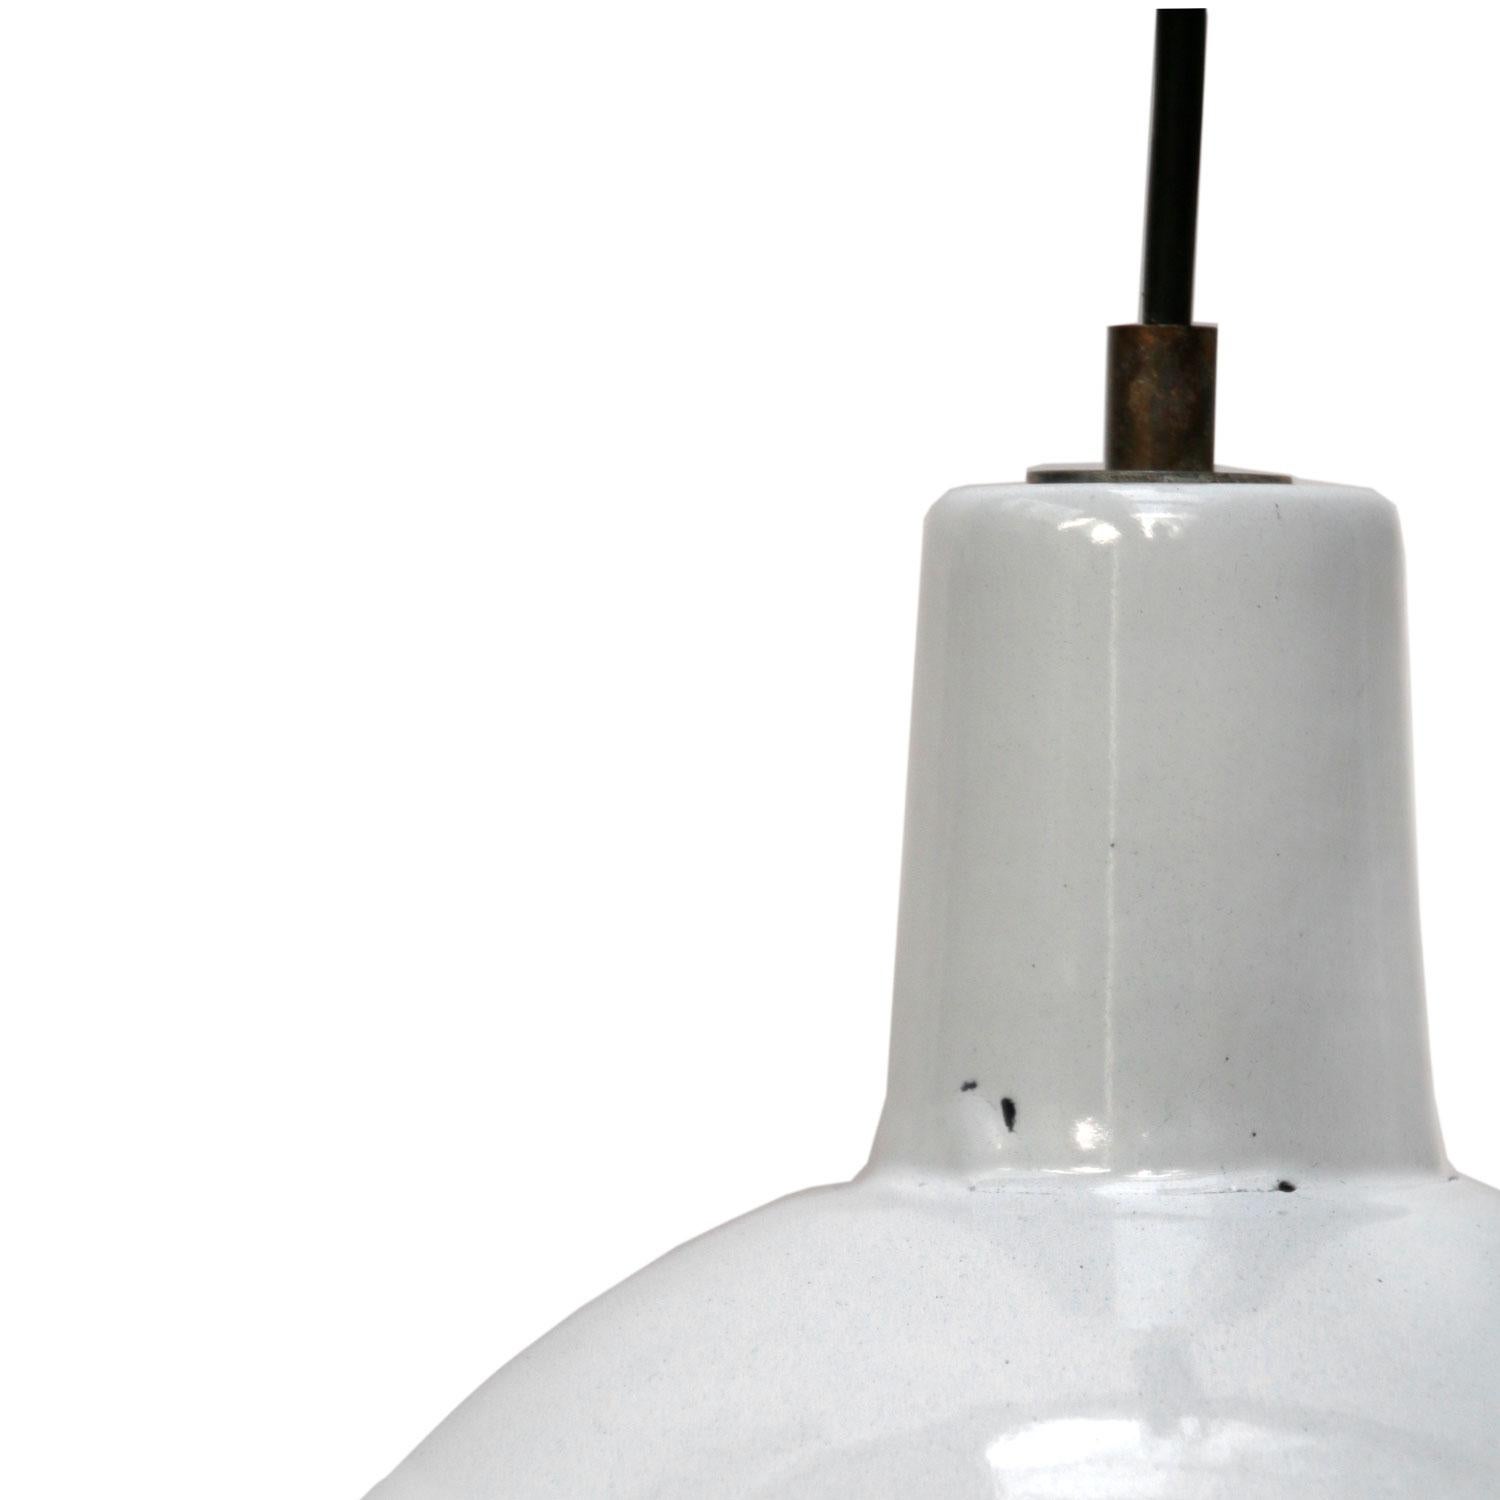 Factory hanging light. White enamel. White interior.
Brass strain relief with 2 meter wire.  

Measure: Weight: 1.0 kg / 2.2 lb

Priced per individual item. All lamps have been made suitable by international standards for incandescent light